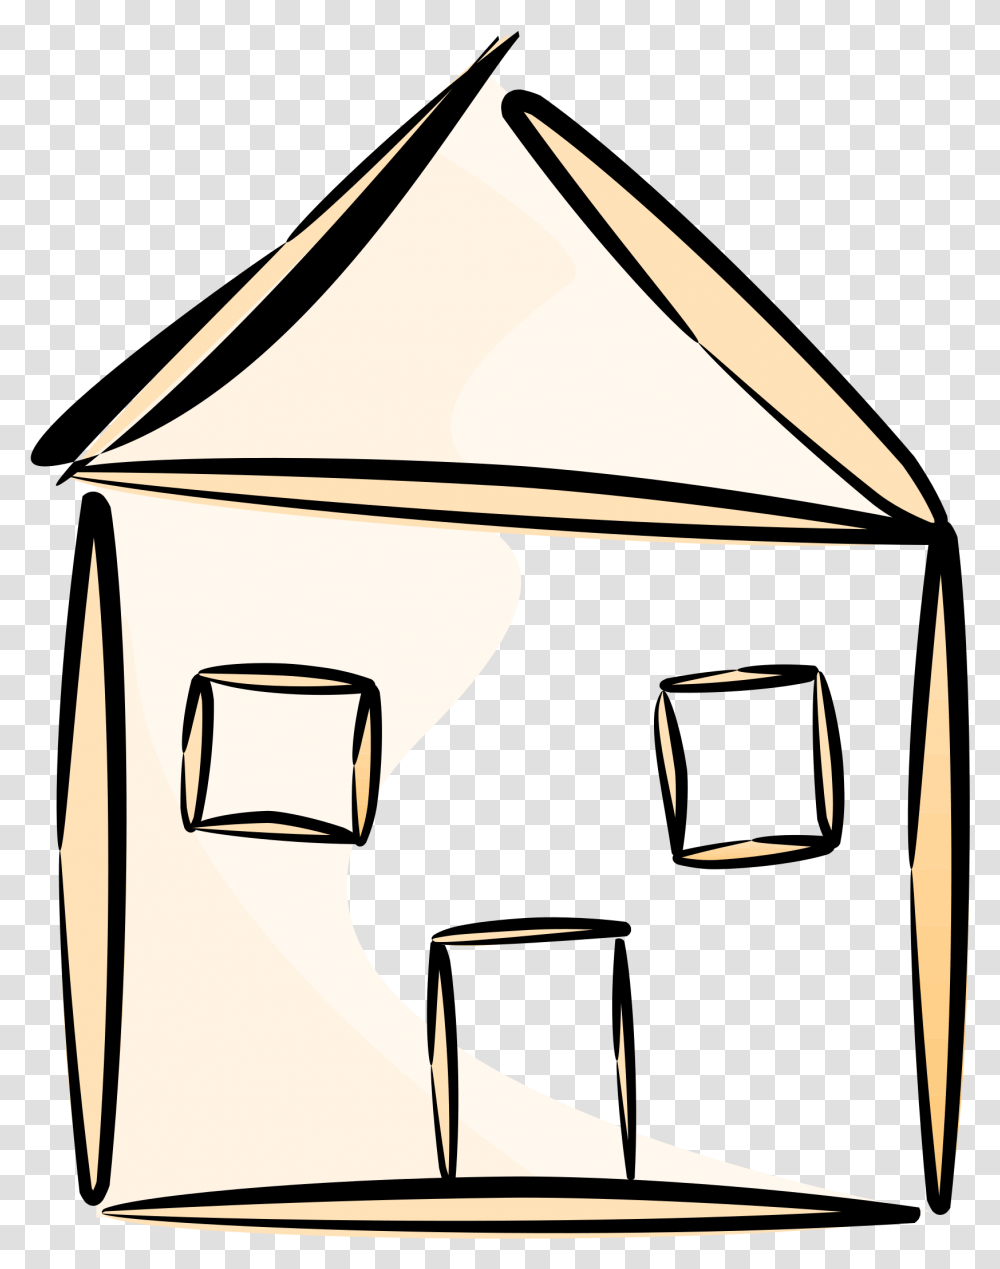 Building House Home Stylized Simple Outline House Outline Clipart, Lamp, Tent, Den, Drawing Transparent Png